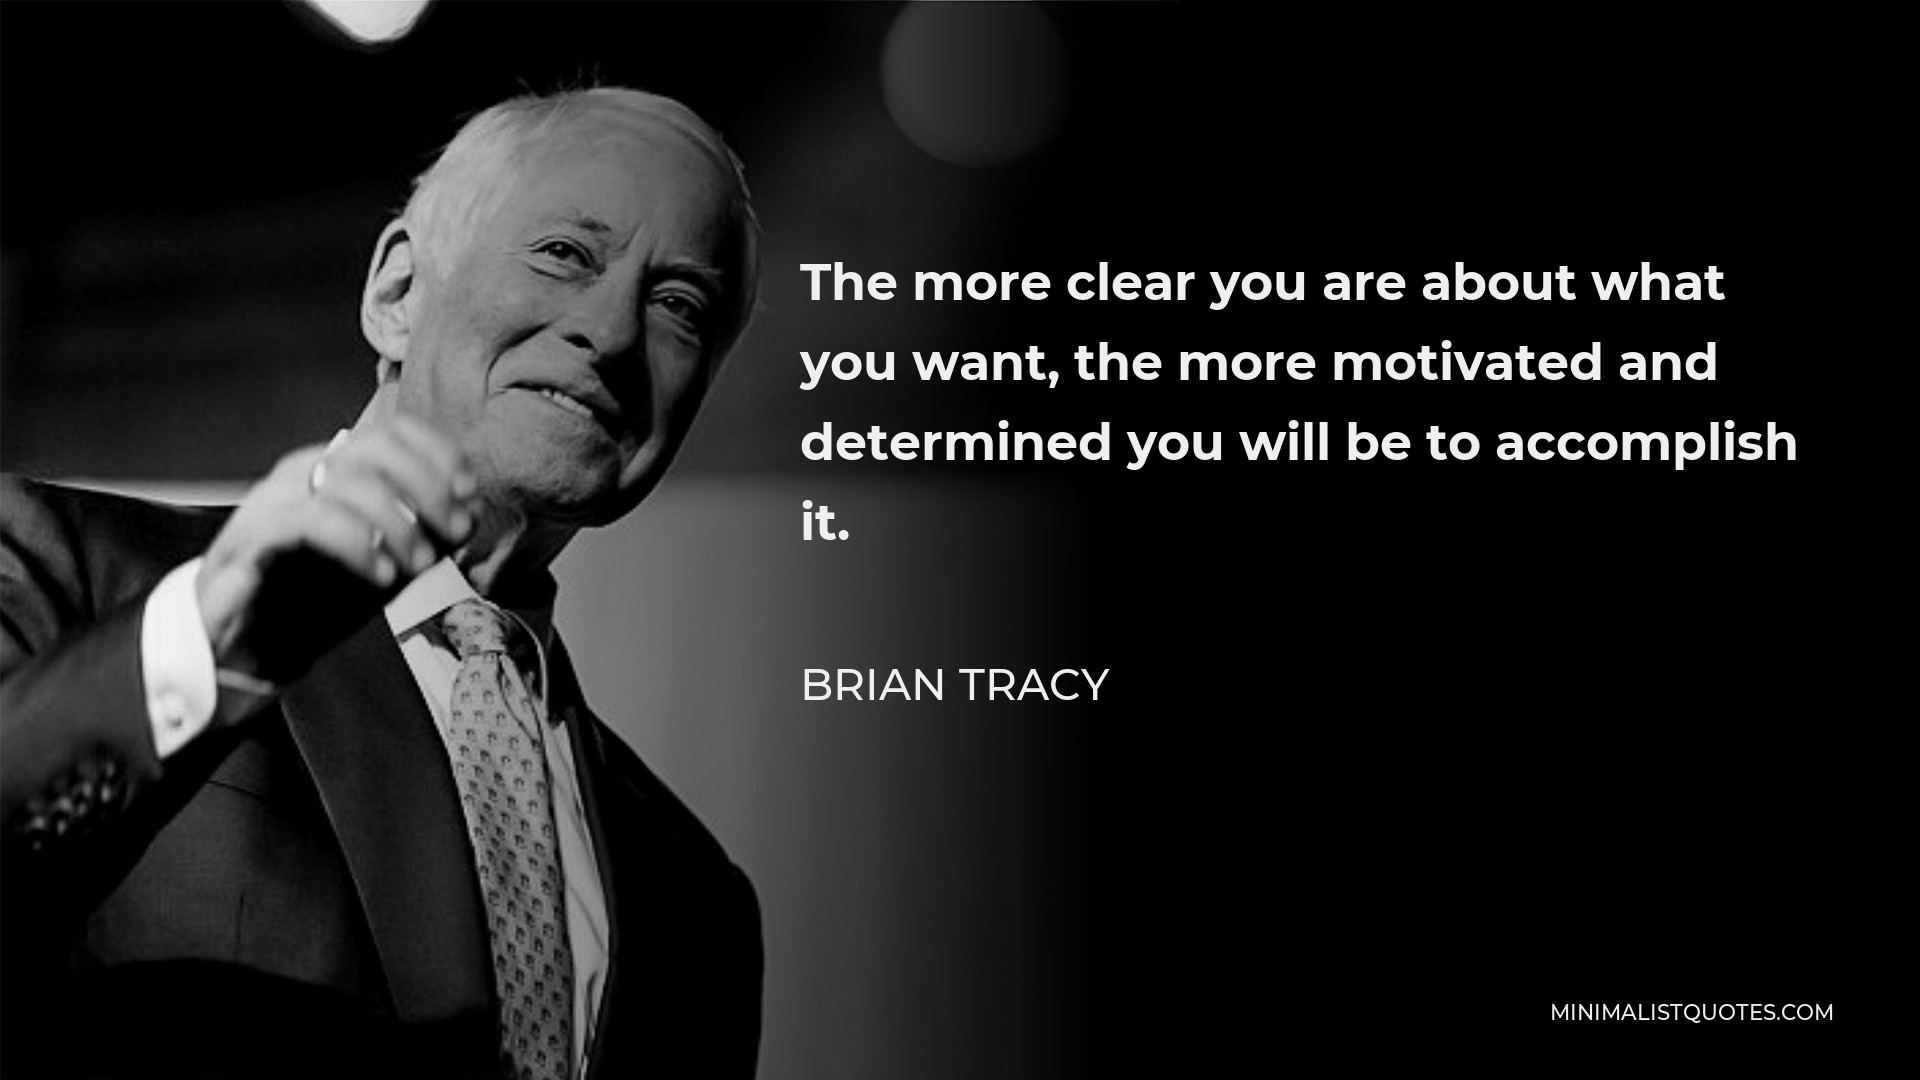 Brian Tracy Quote - The more clear you are about what you want, the more motivated and determined you will be to accomplish it.